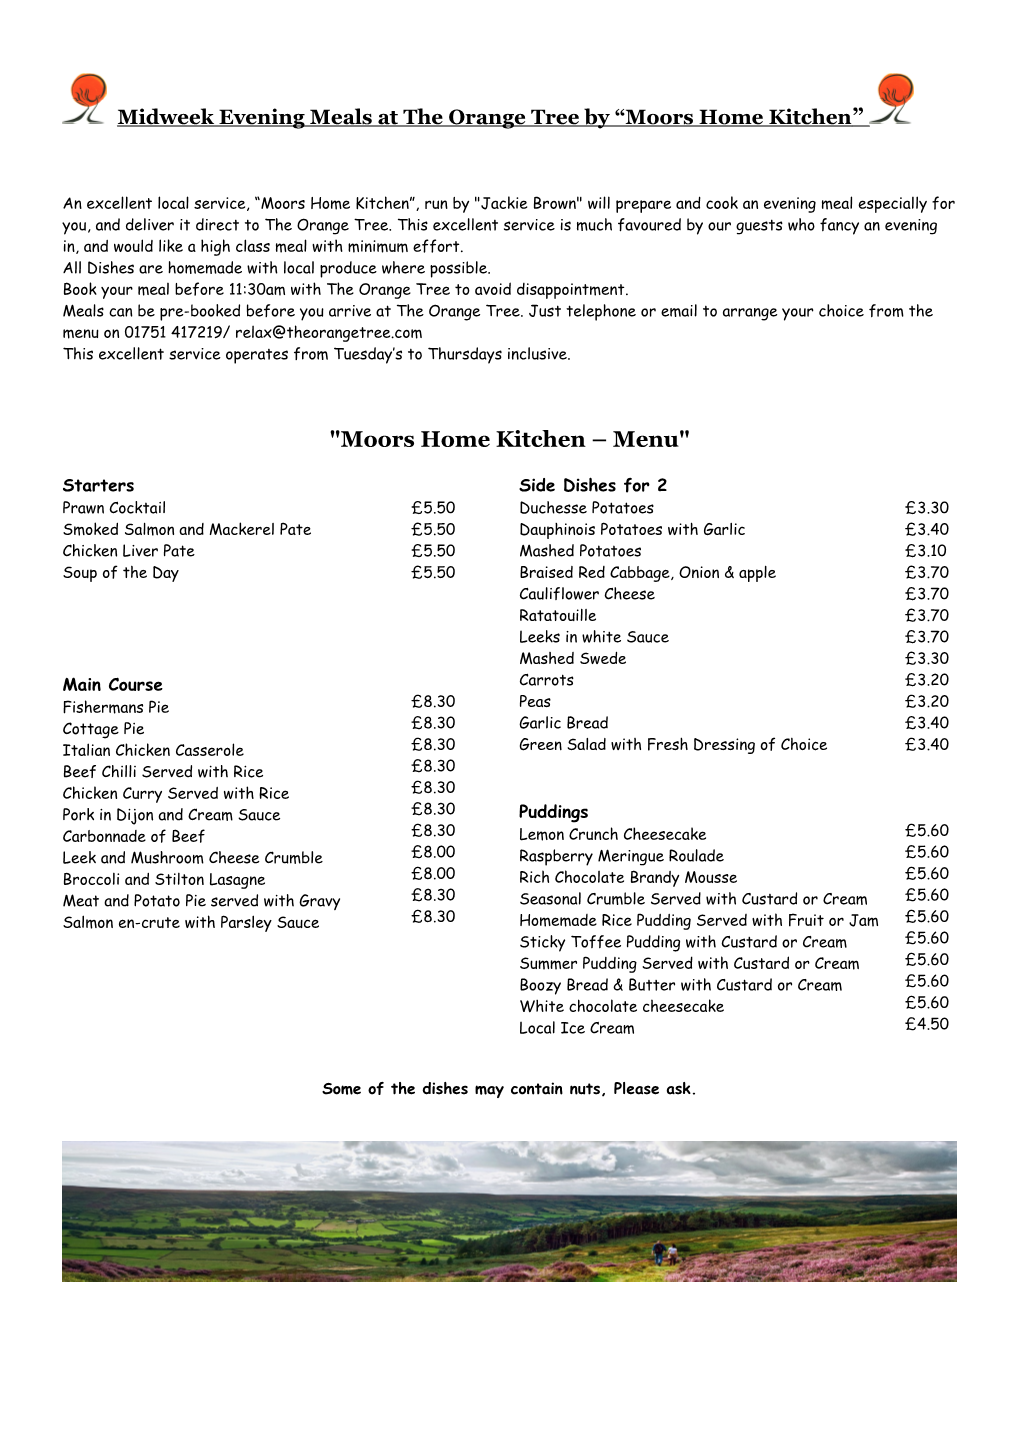 Midweek Evening Meals at the Orange Tree by Moors Home Kitchen